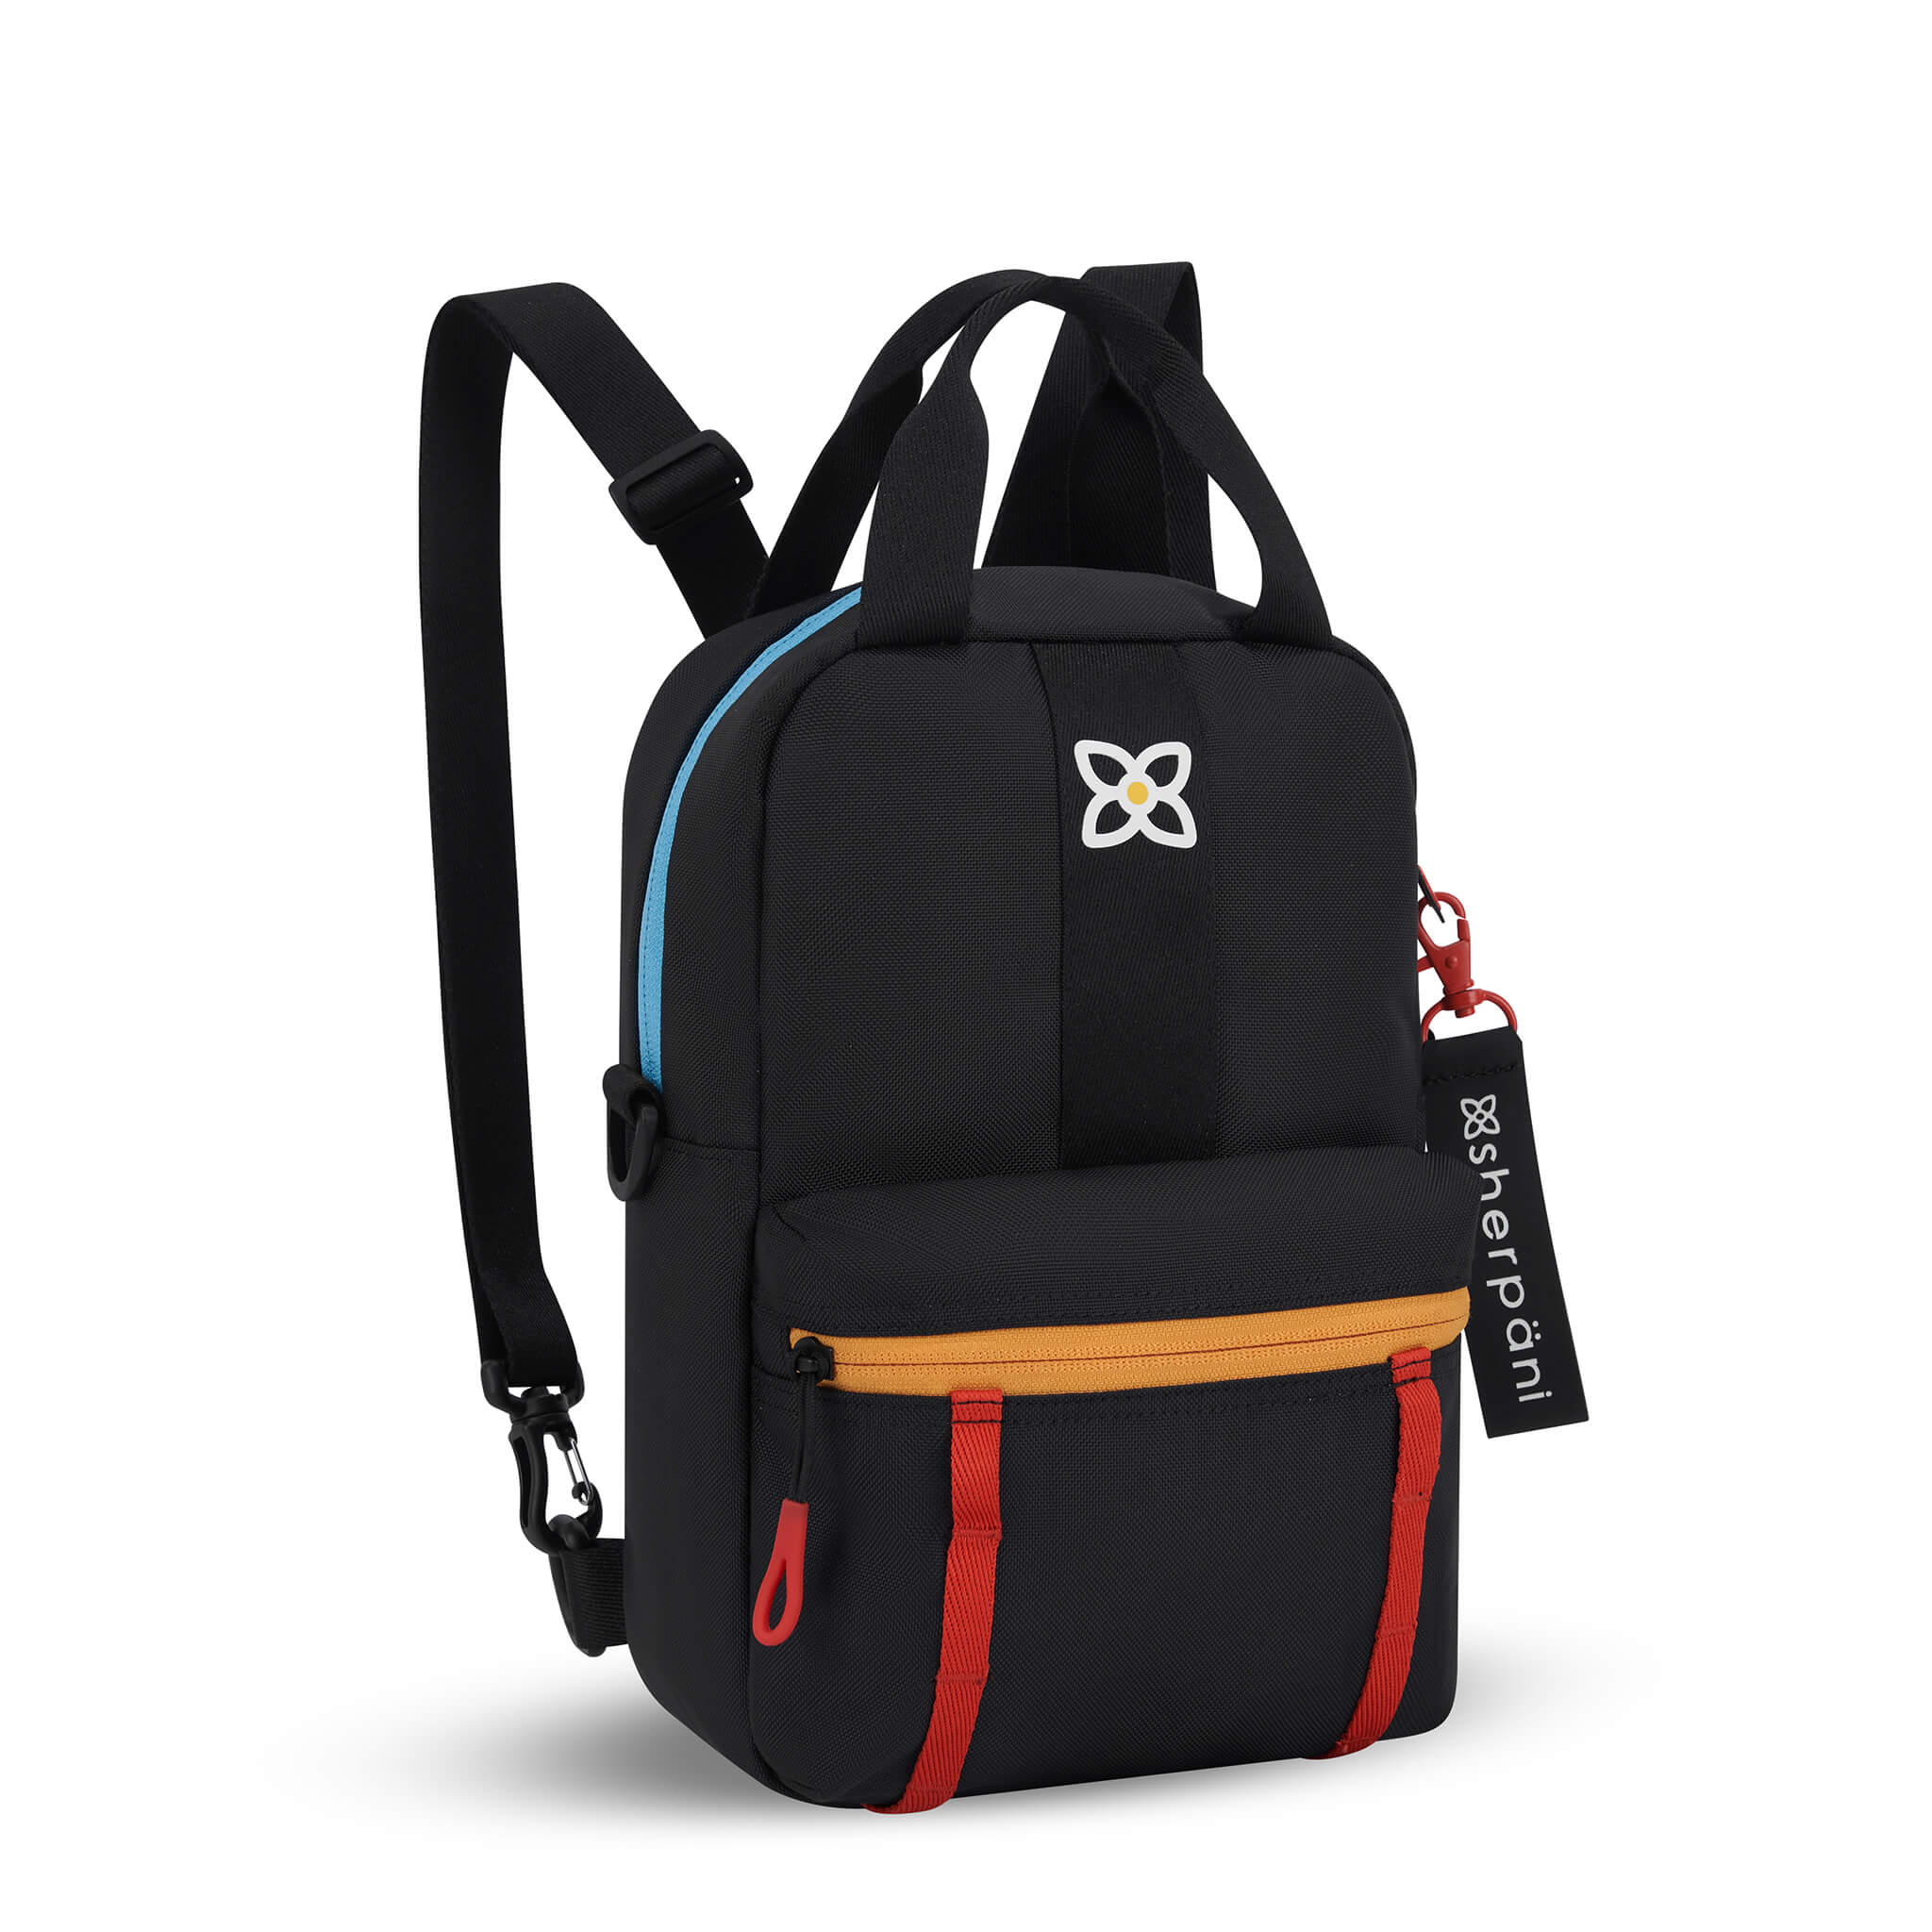 Angled front view of Sherpani mini backpack the Logan in Chromatic. The bag is black with blue, yellow and red accents. The Logan has fixed tote handles and adjustable backpack straps.